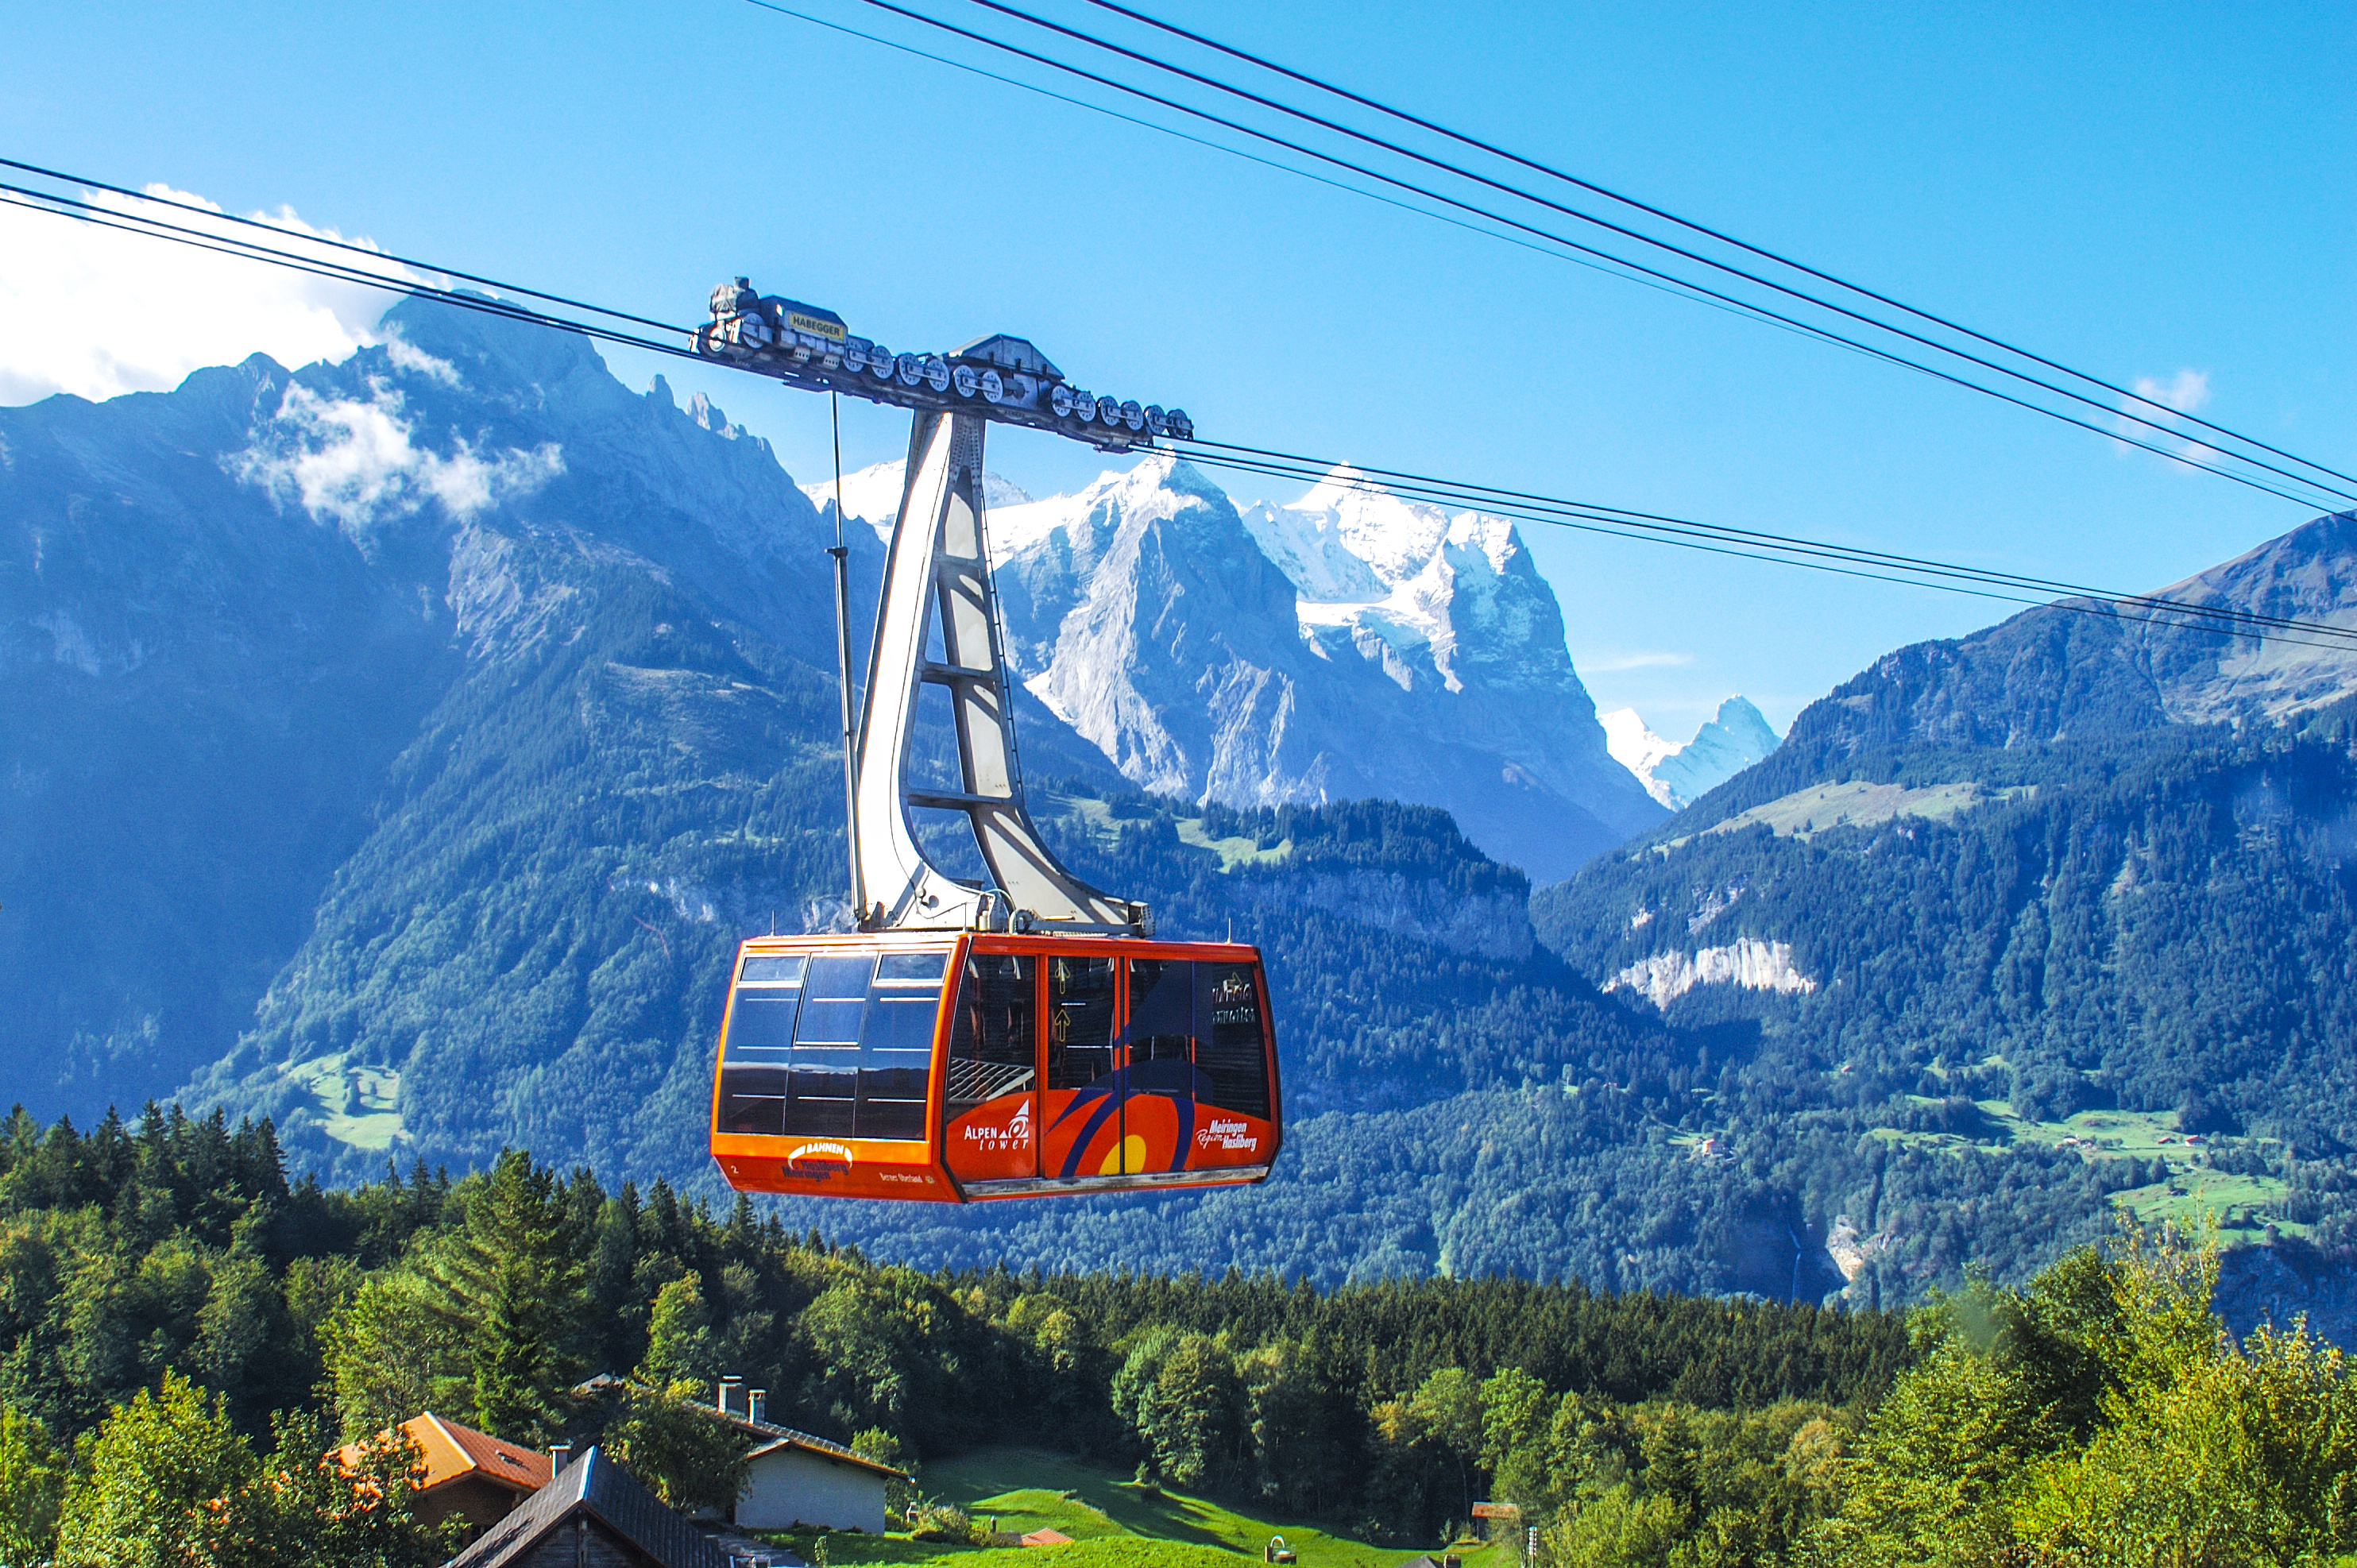 Aerial Tramway, Cable car, Stock photos, HD downloads, 2970x1980 HD Desktop